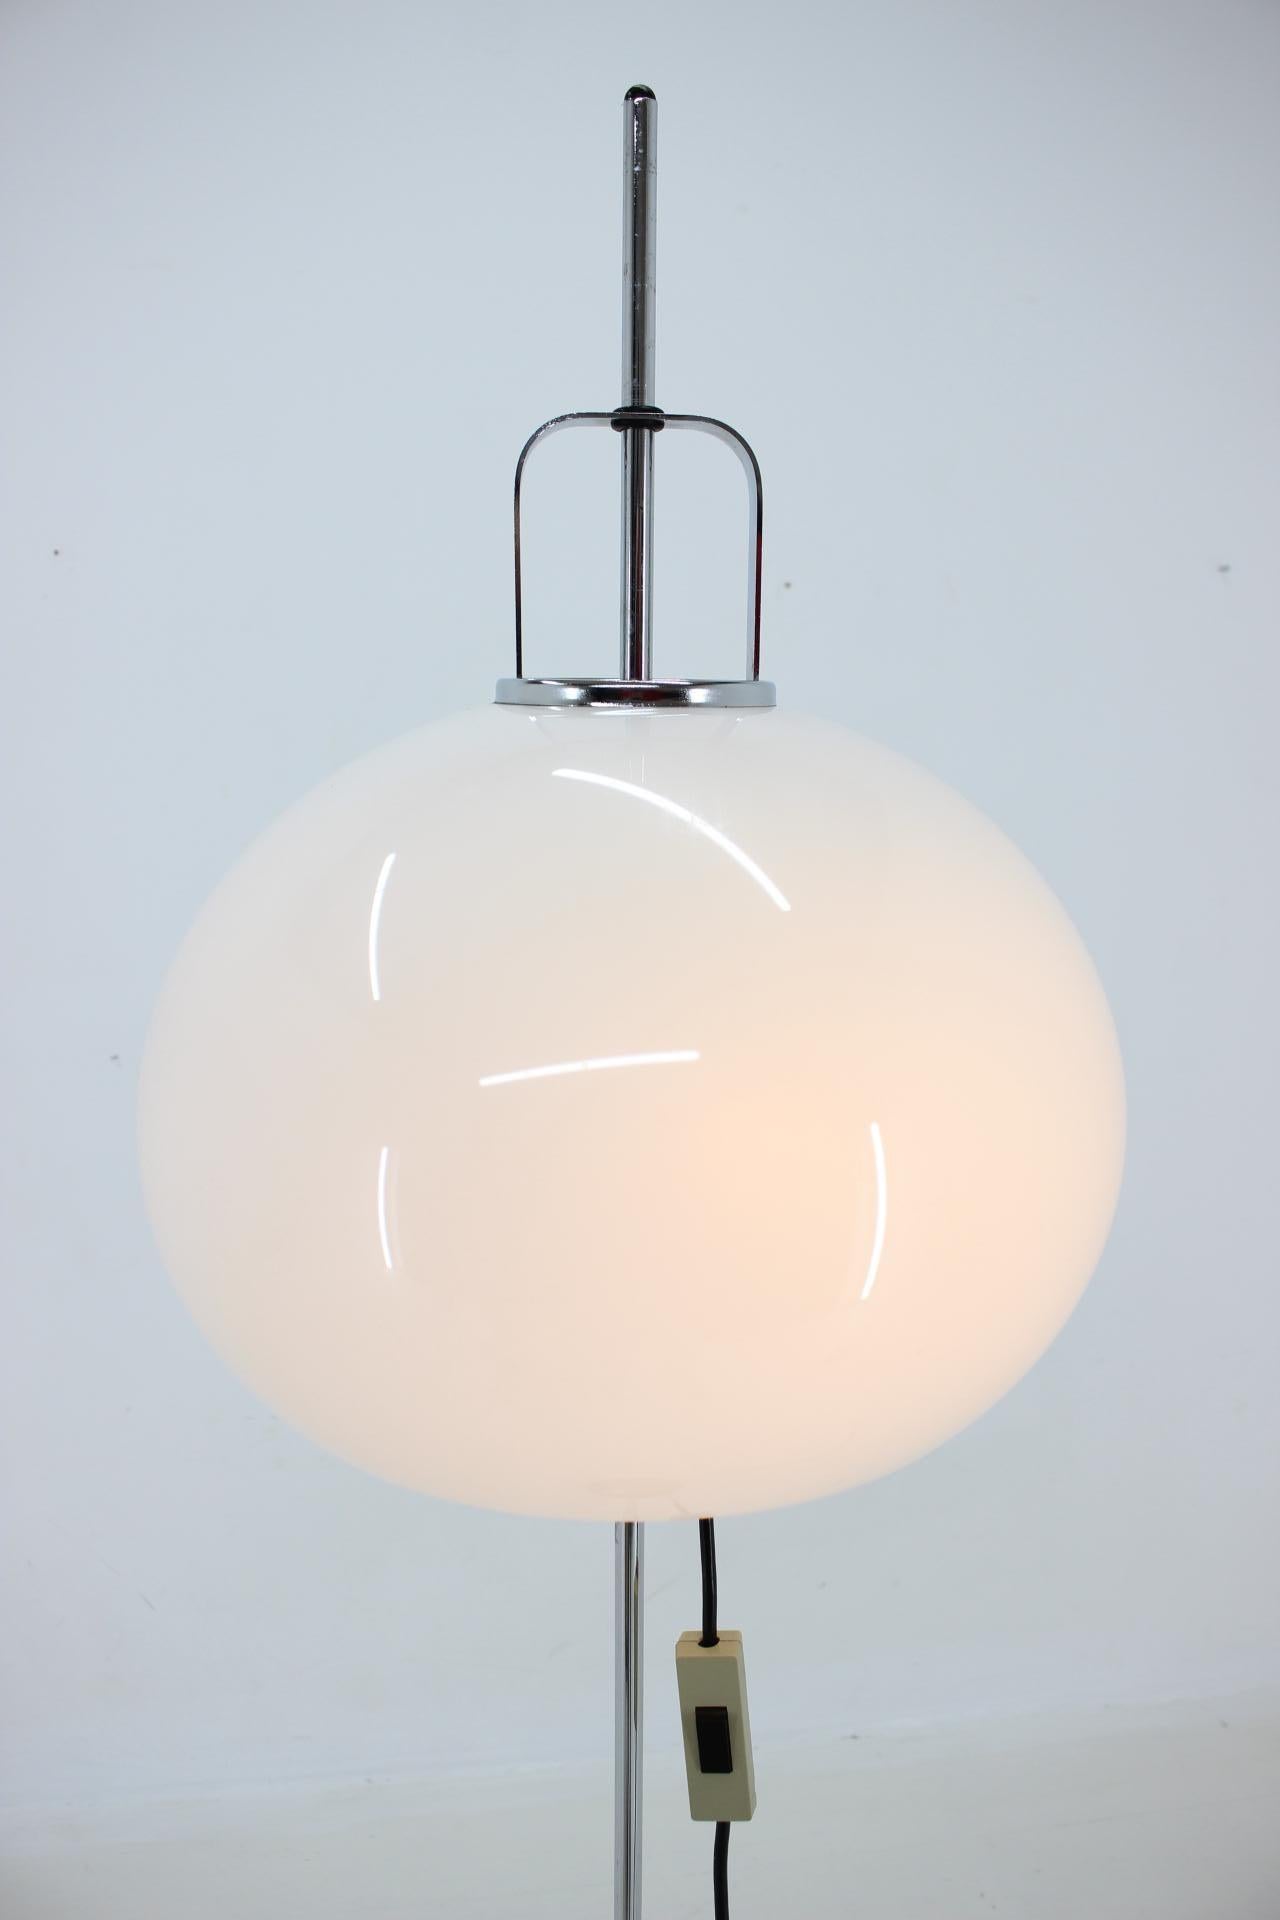 Late 20th Century 1970s Adjustable Floor Lamp Designed by Guzzini for Meblo, Italy For Sale